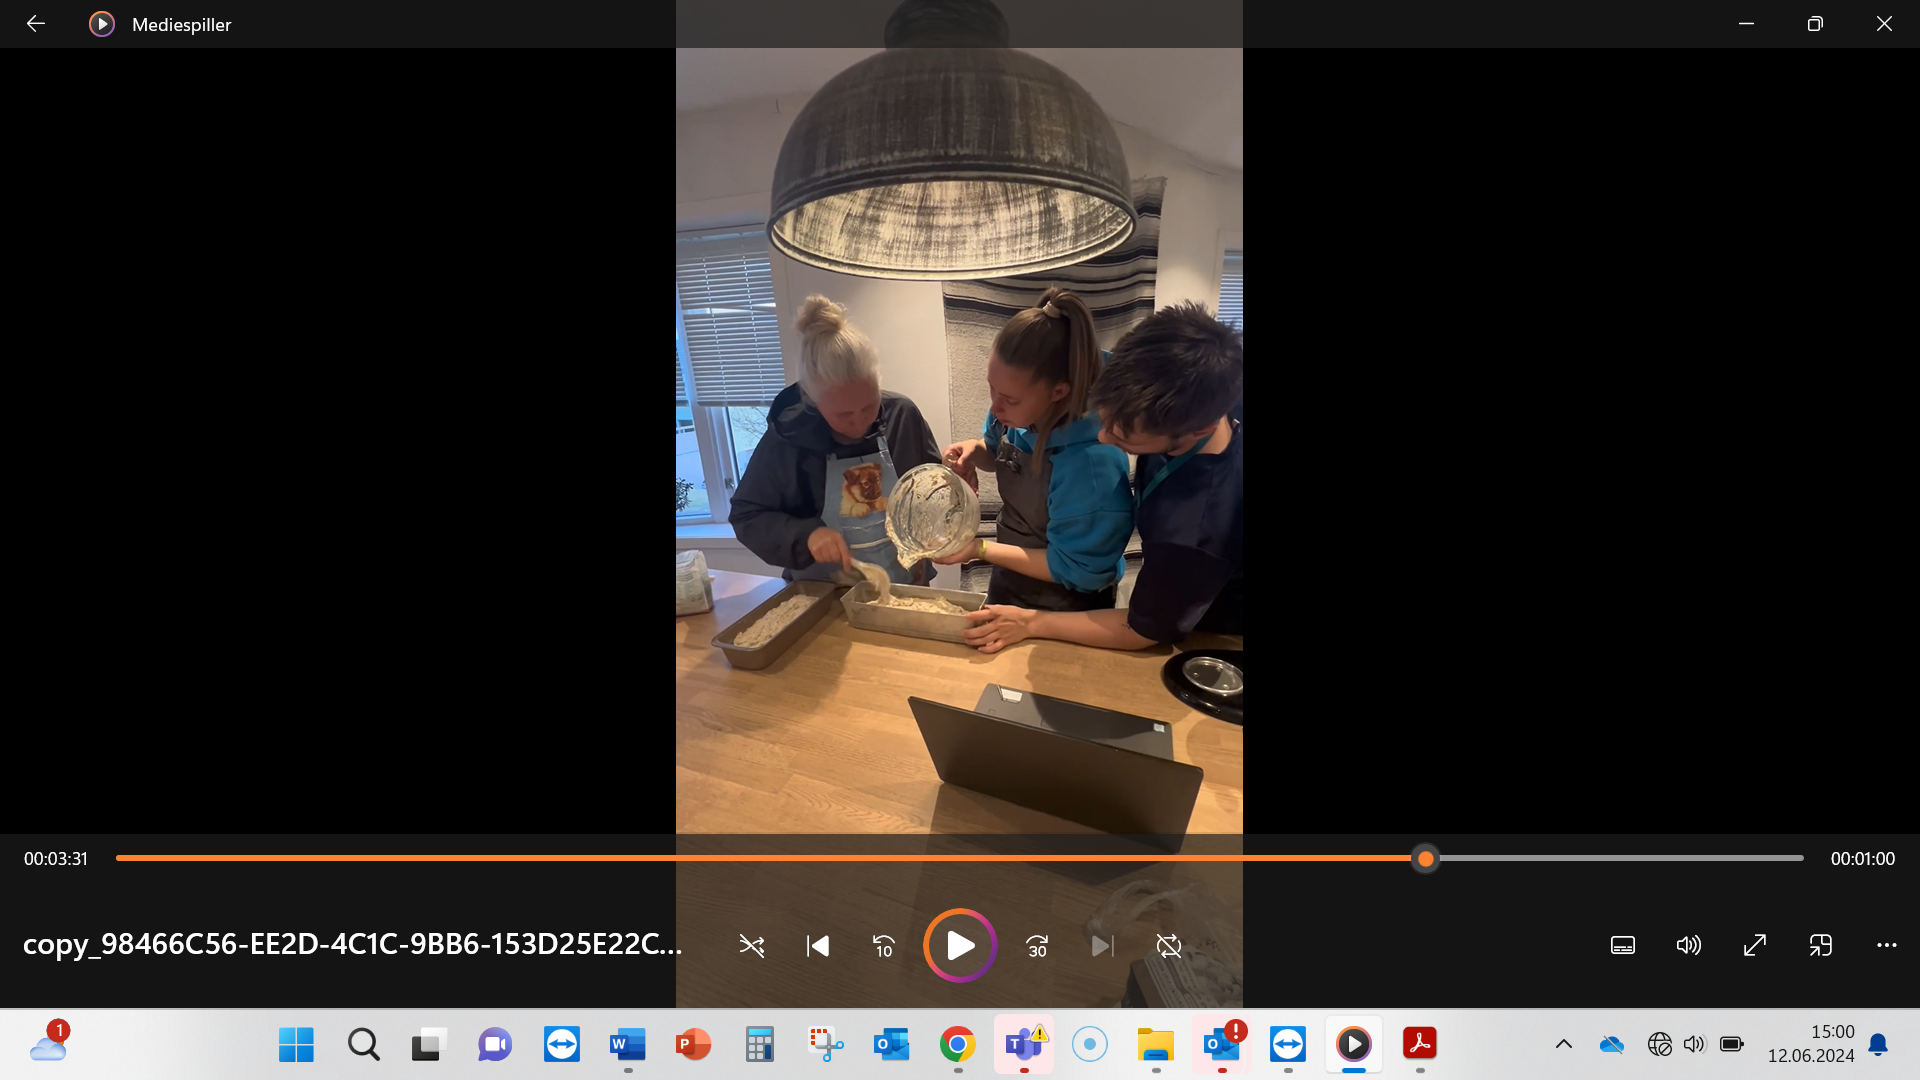 Screenshot of students at work in their own home kitchen.